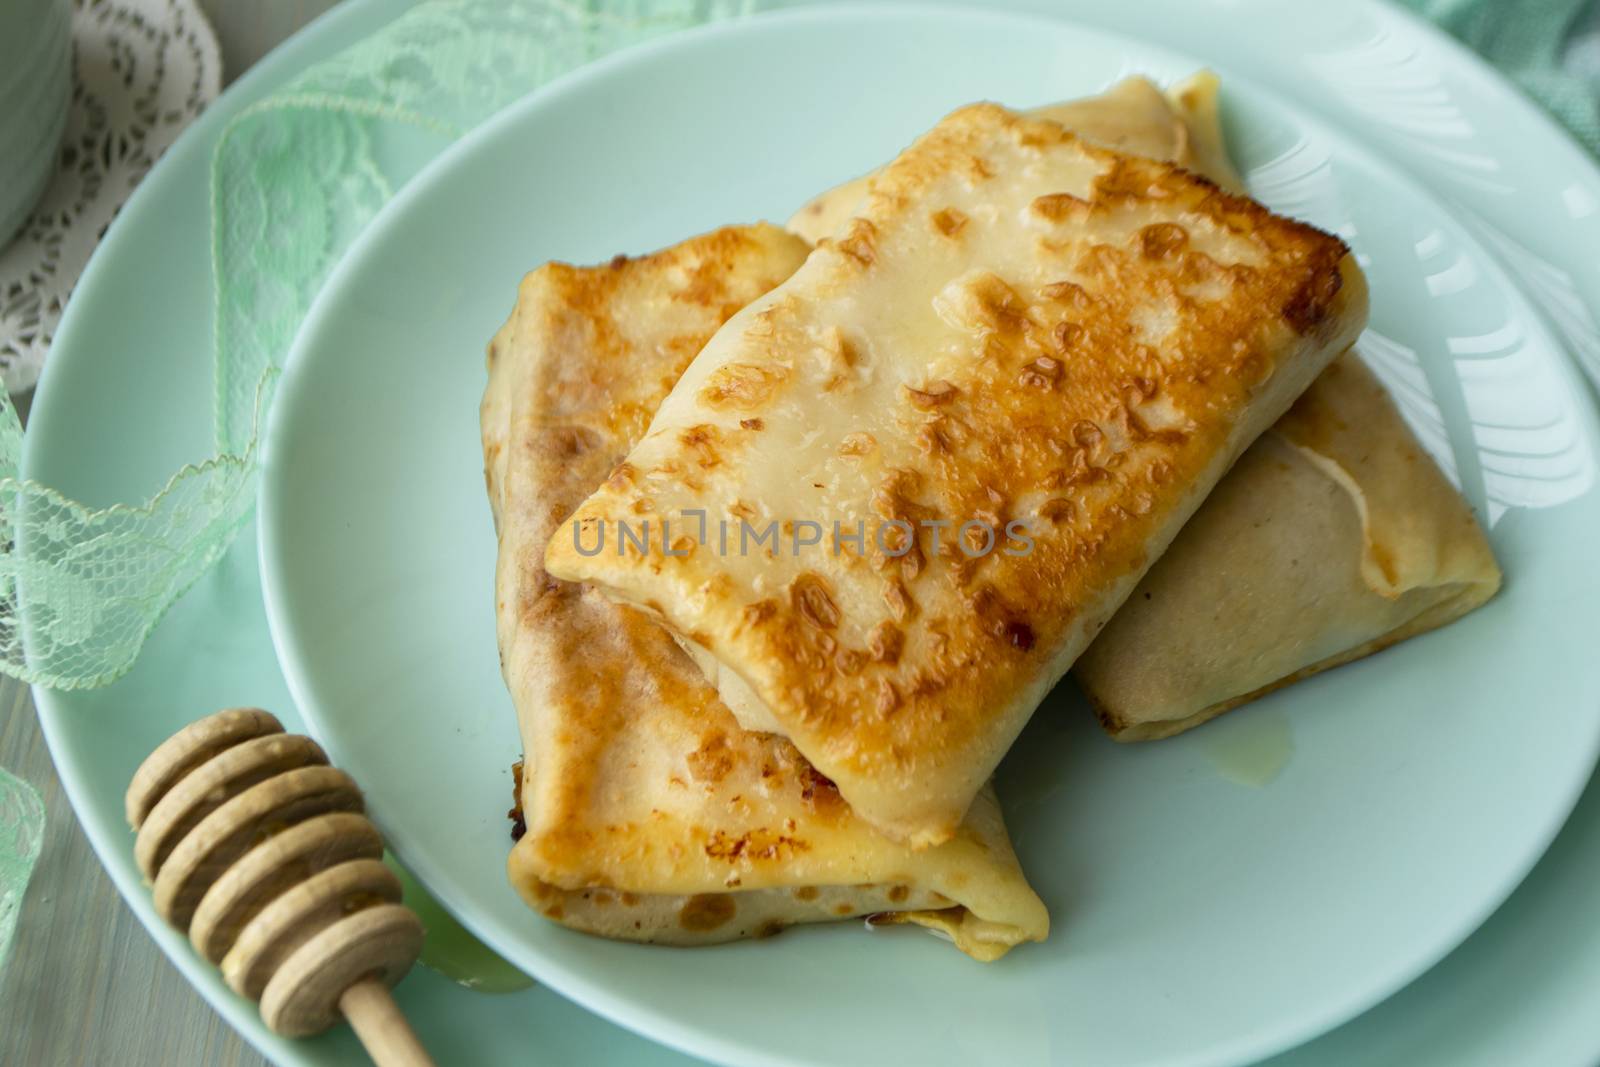 Crepes stuffed with apple on turquoise plate by annaolgabymonaco